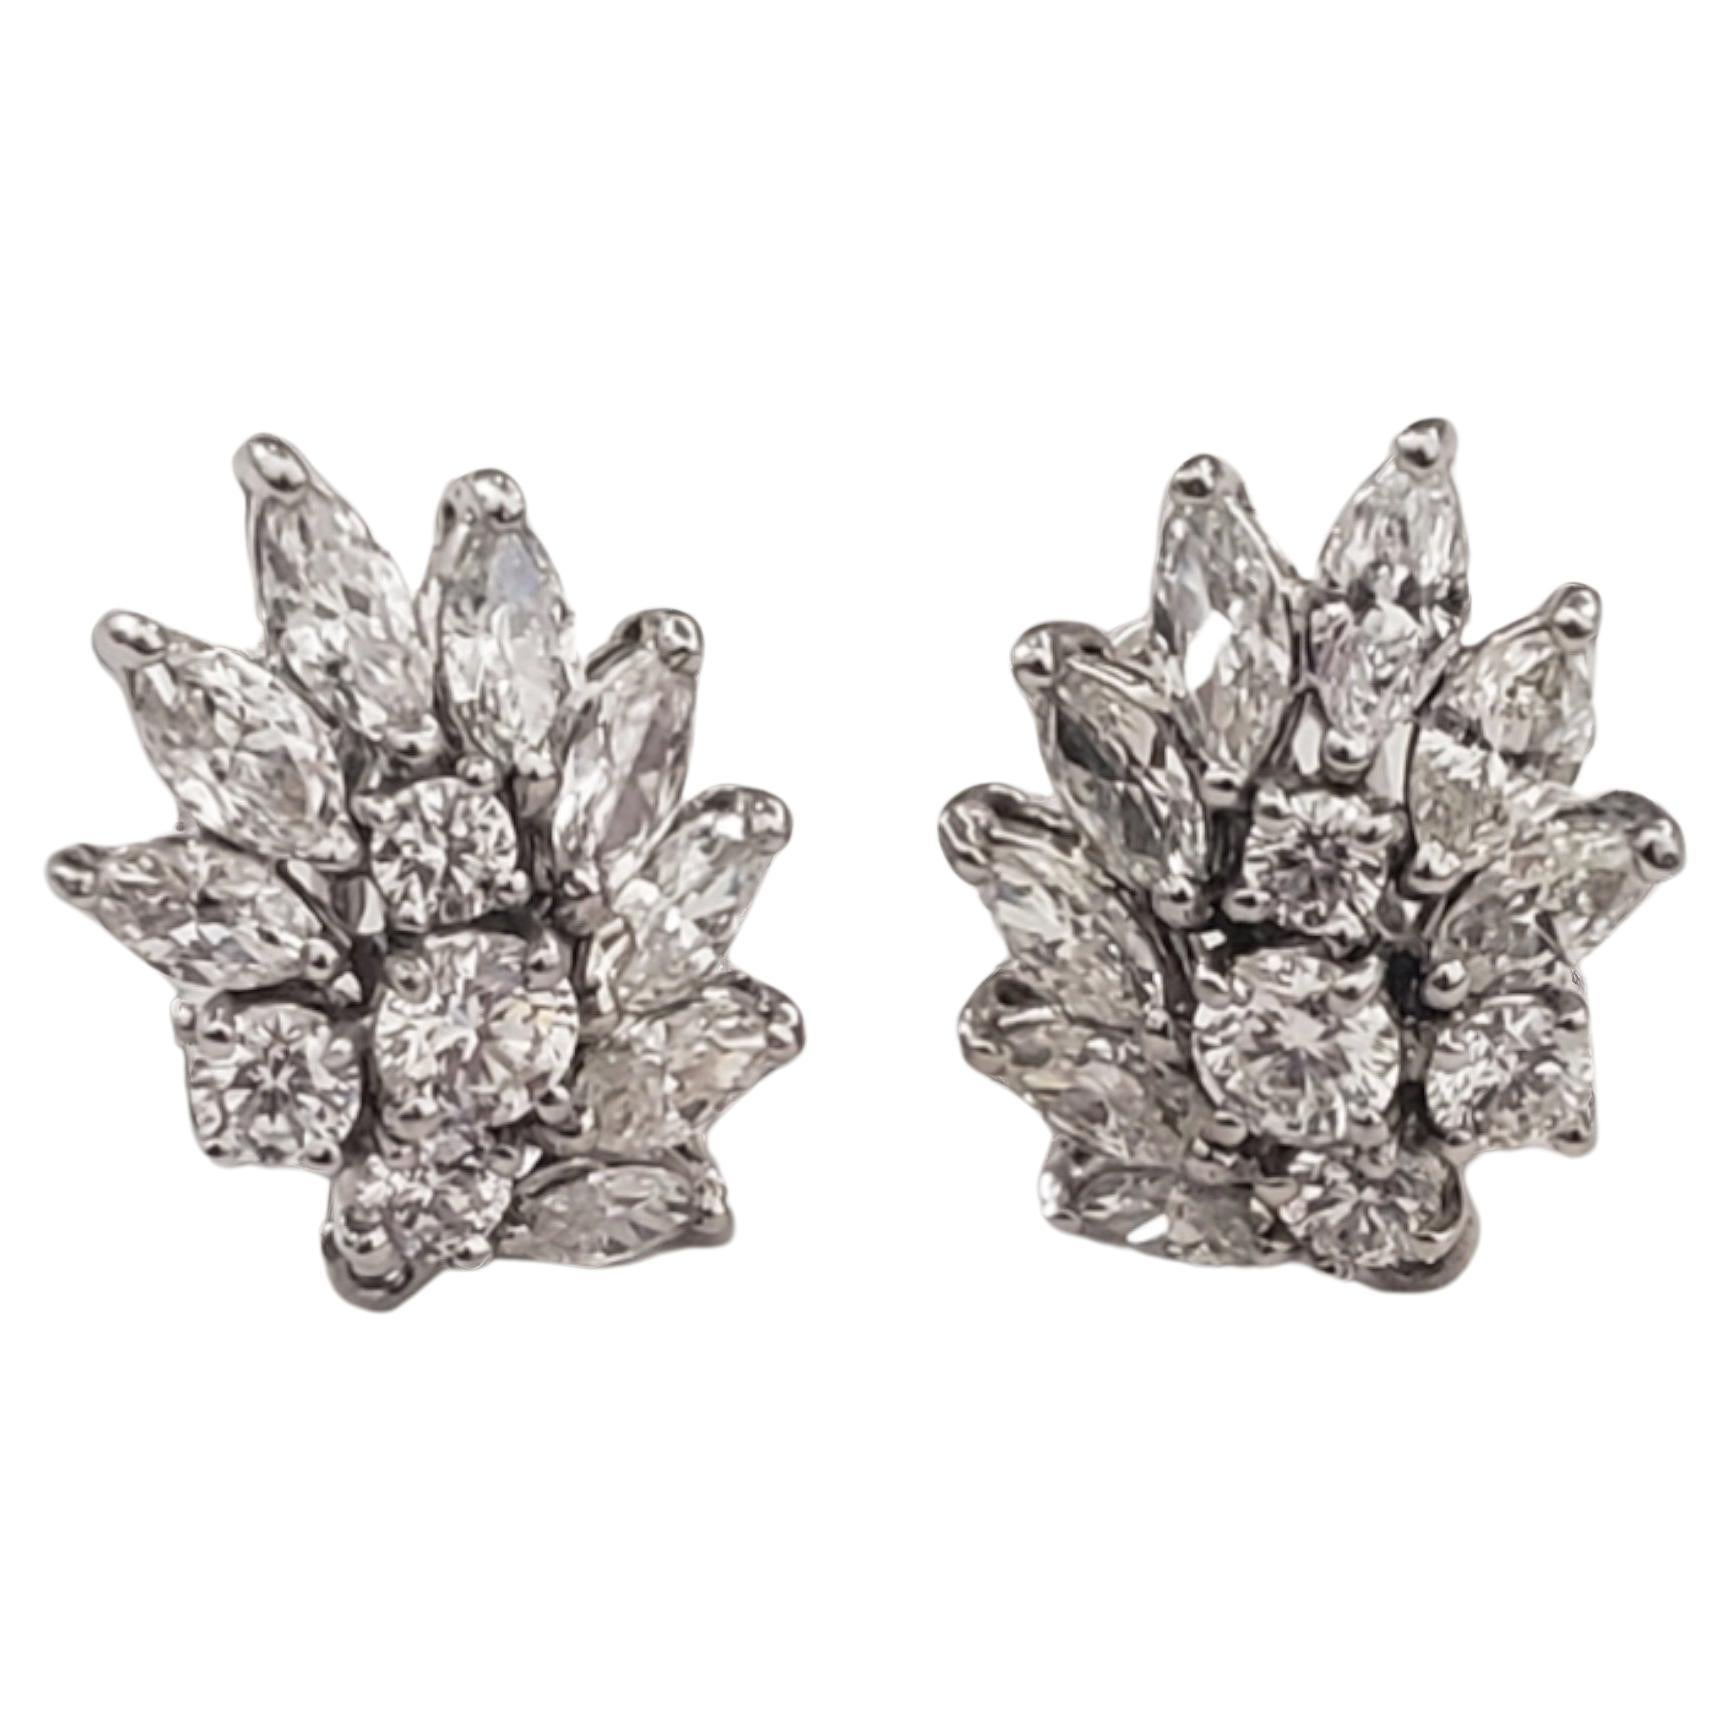 For those who appreciate the finer things in life, these exquisite diamond earrings in platinum from LaFrancee are the perfect addition to any jewelry collection. Crafted from platinum, these omega clip-style earrings feature dazzling diamonds that